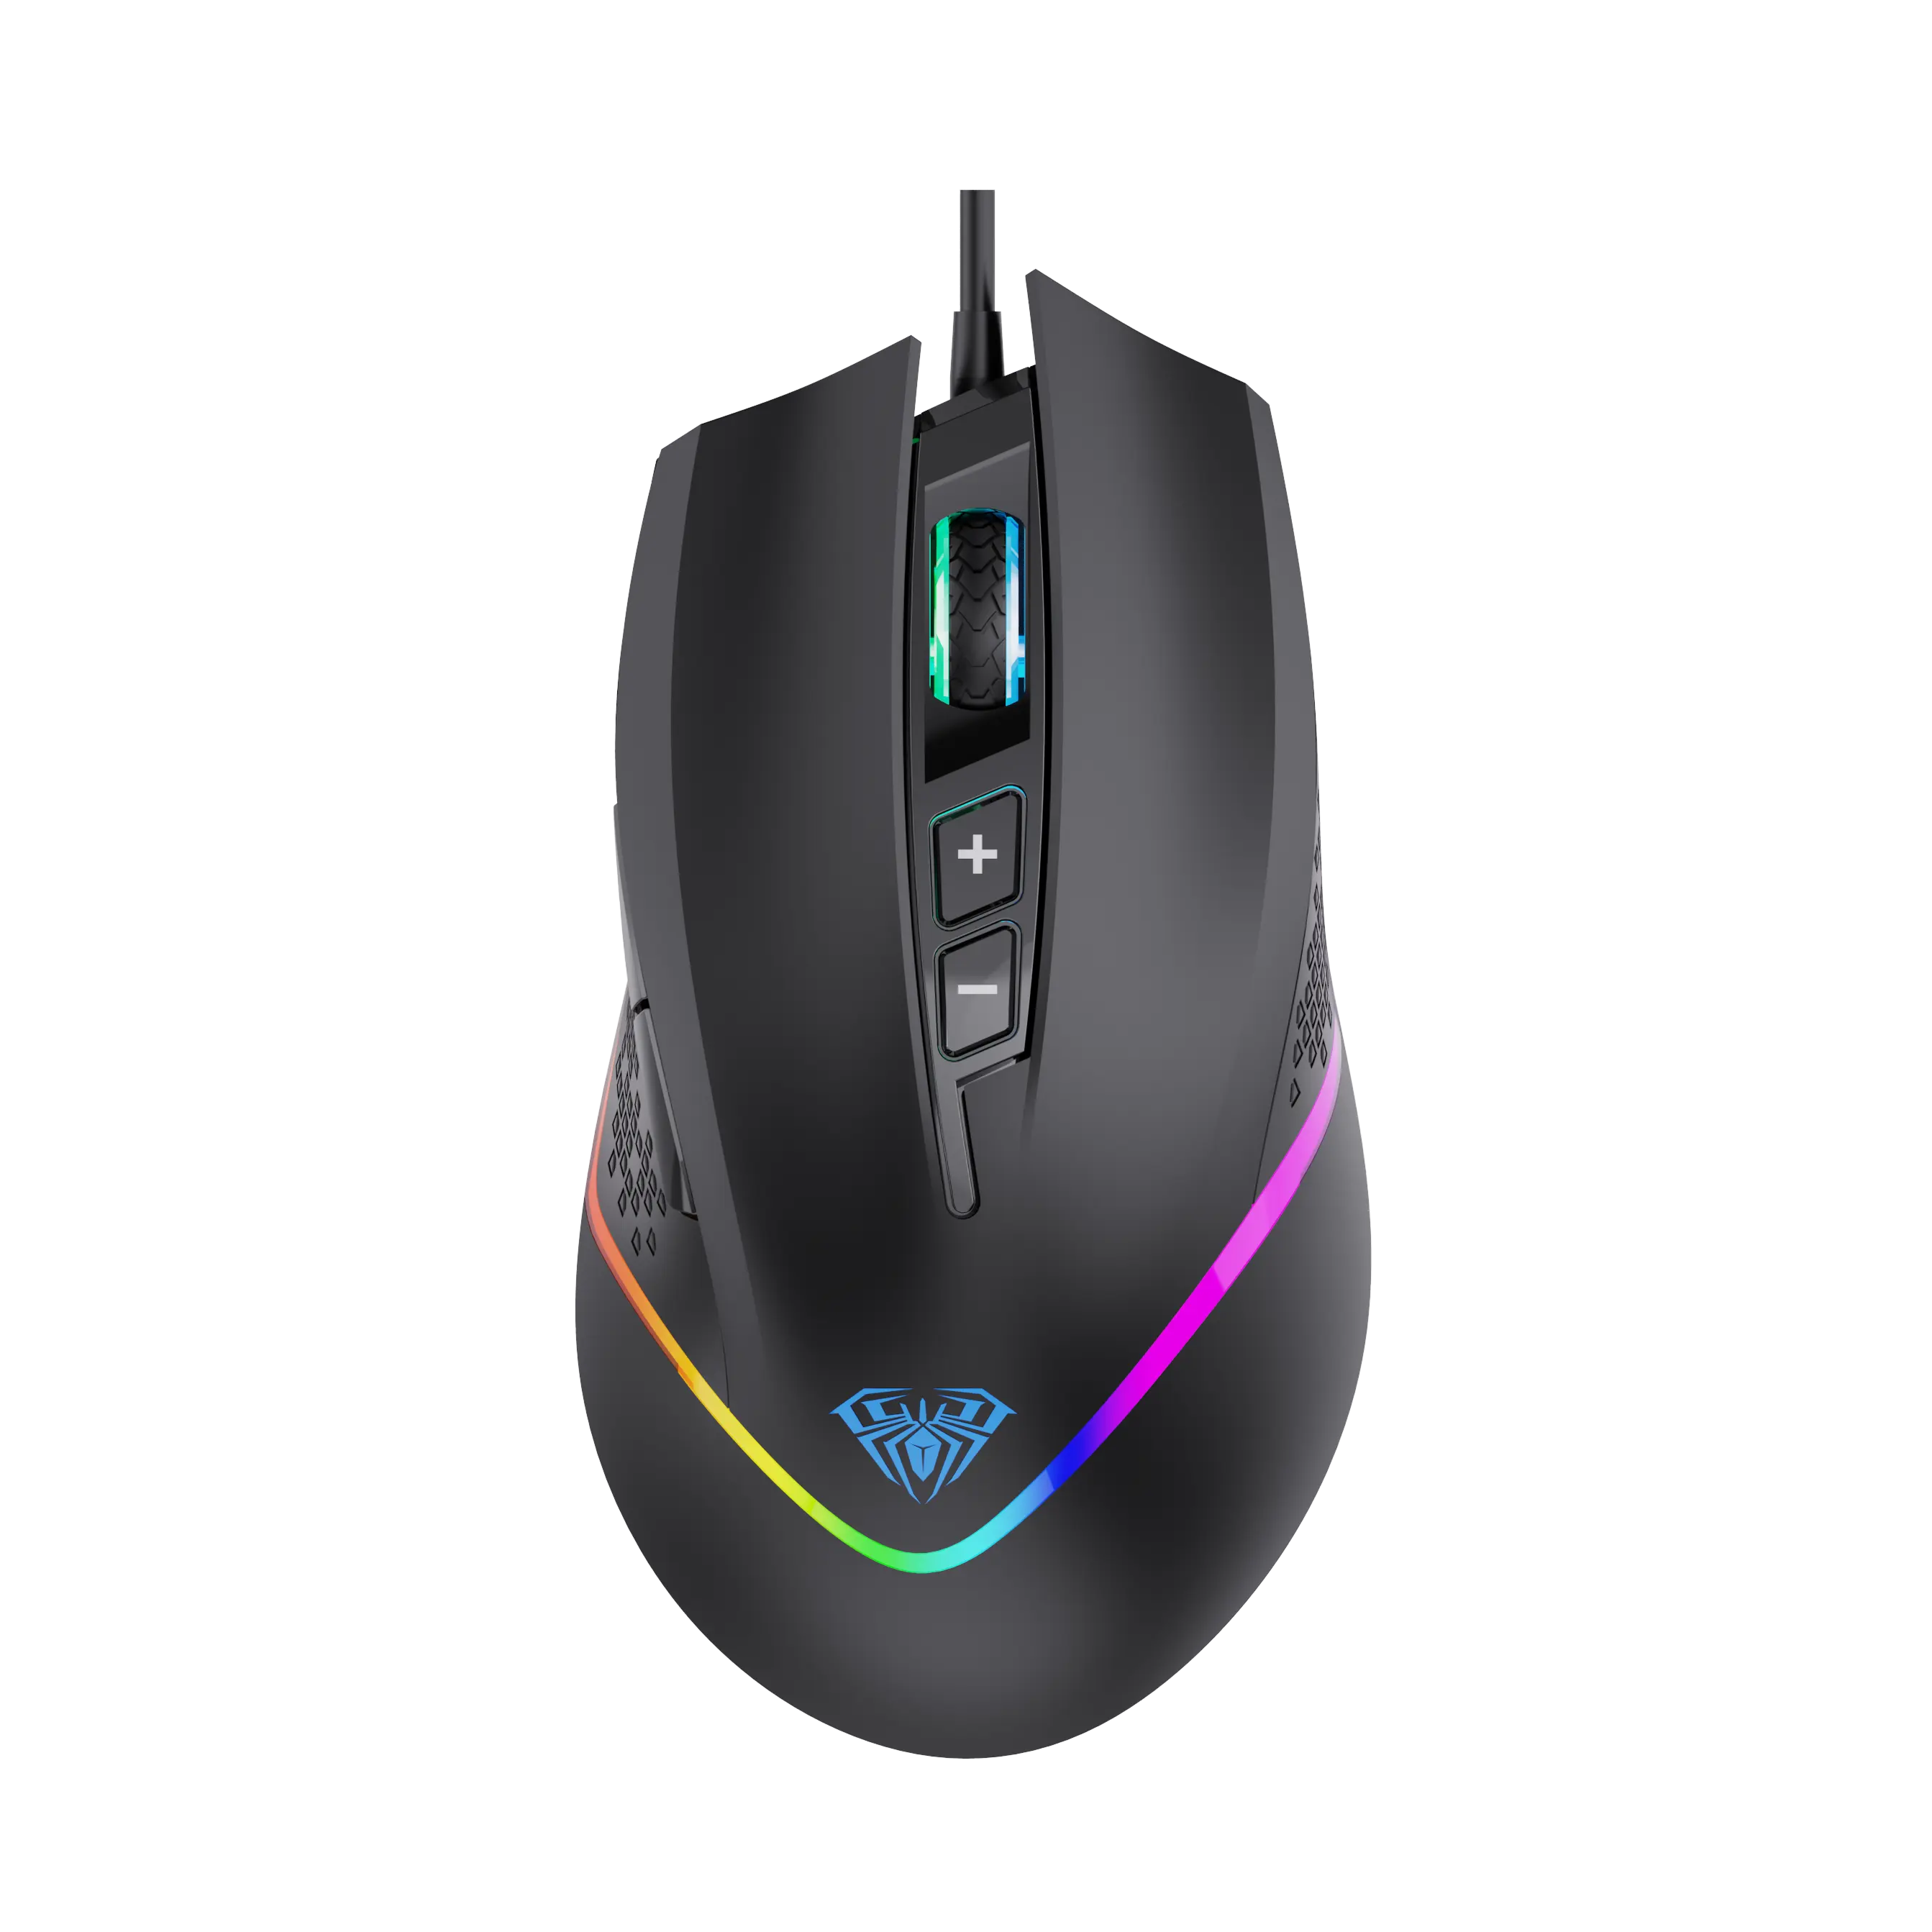 AULA F805 Full color Breathing Optical Ergonomic Gaming Mice Ergonomic Design Computer Mouse for Windows PC Gamers